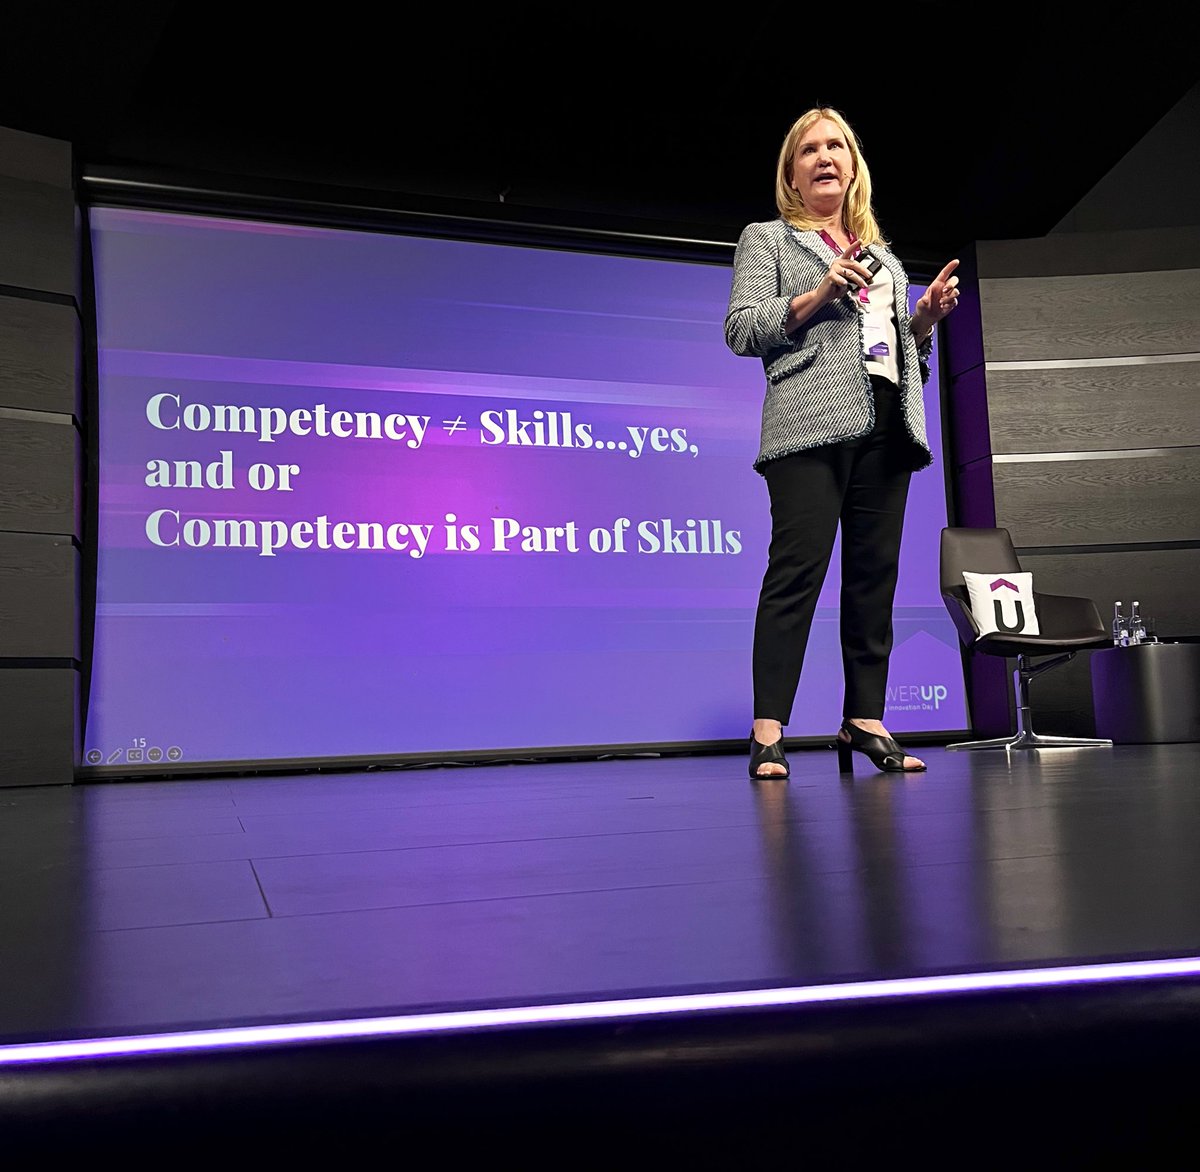 SKILLS > COMPETENCIES 👏 “We saw the skills, we put him in the new job, and now he’s about to get promoted…this is just one way I see skills differently than competencies.” - Karen Fascenda, Udemy CPO #PowerUp